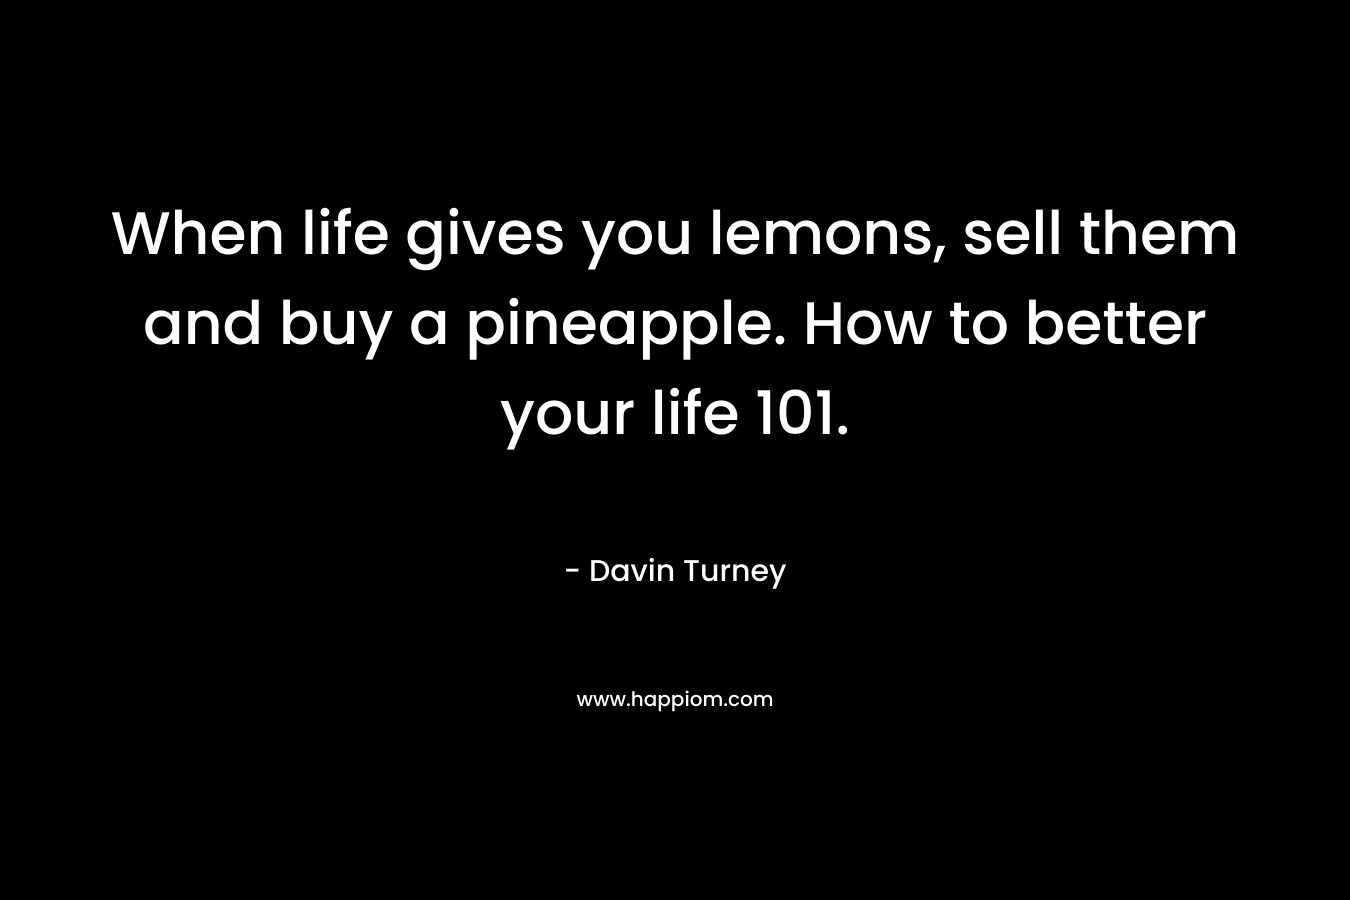 When life gives you lemons, sell them and buy a pineapple. How to better your life 101. – Davin Turney